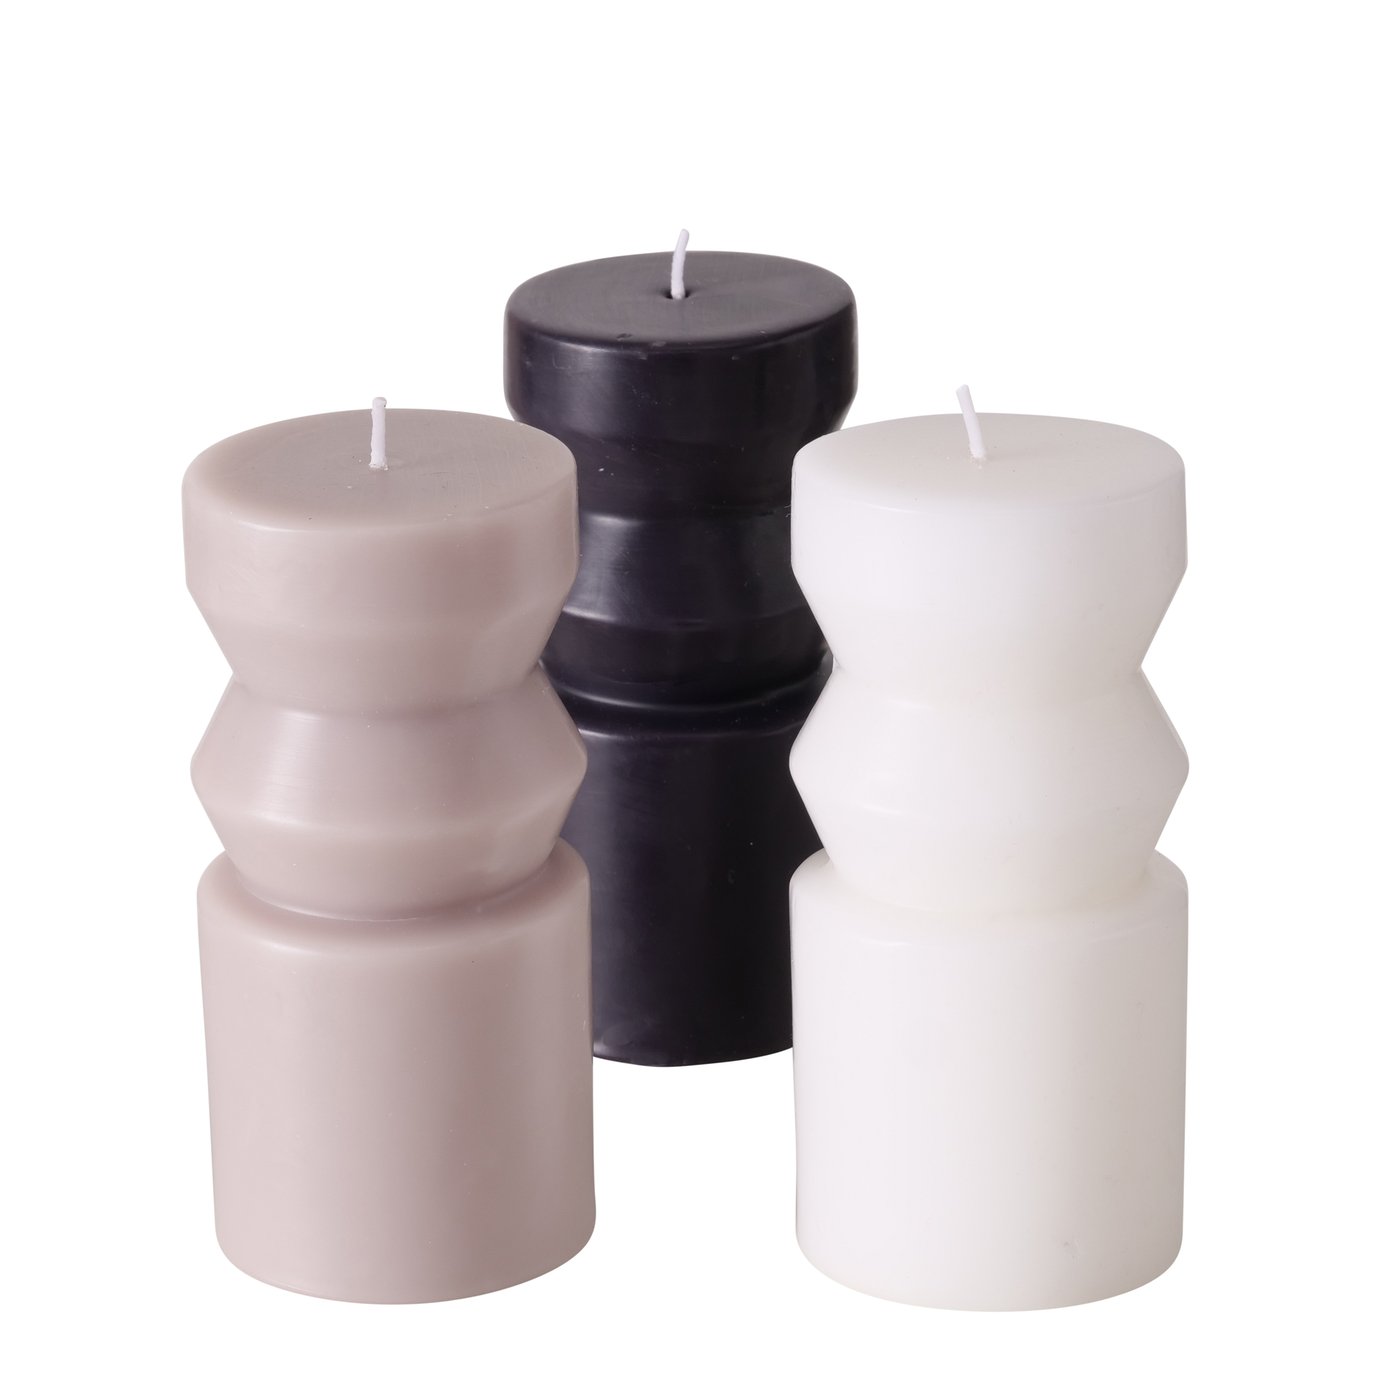 &Quirky Celona Pillar Candle : Black, Grey or White